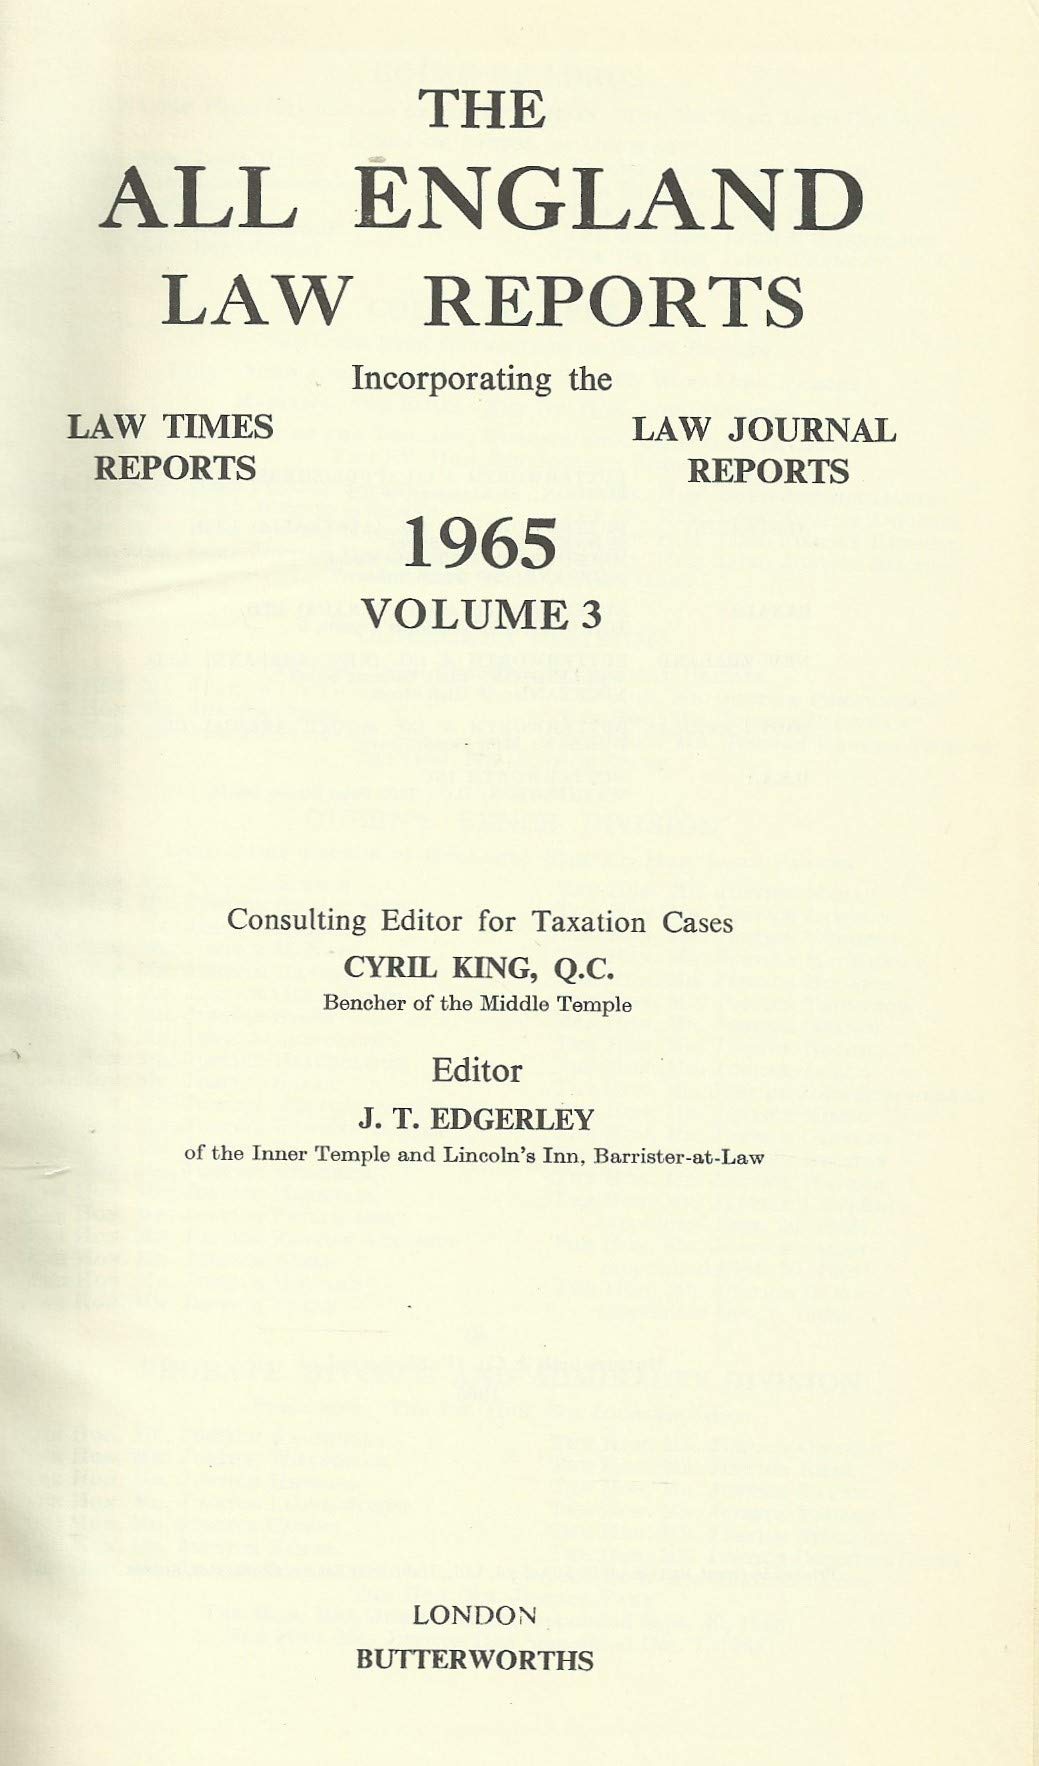 THE ALL ENGLAND LAW REPORTS: 1965, VOLUME III.